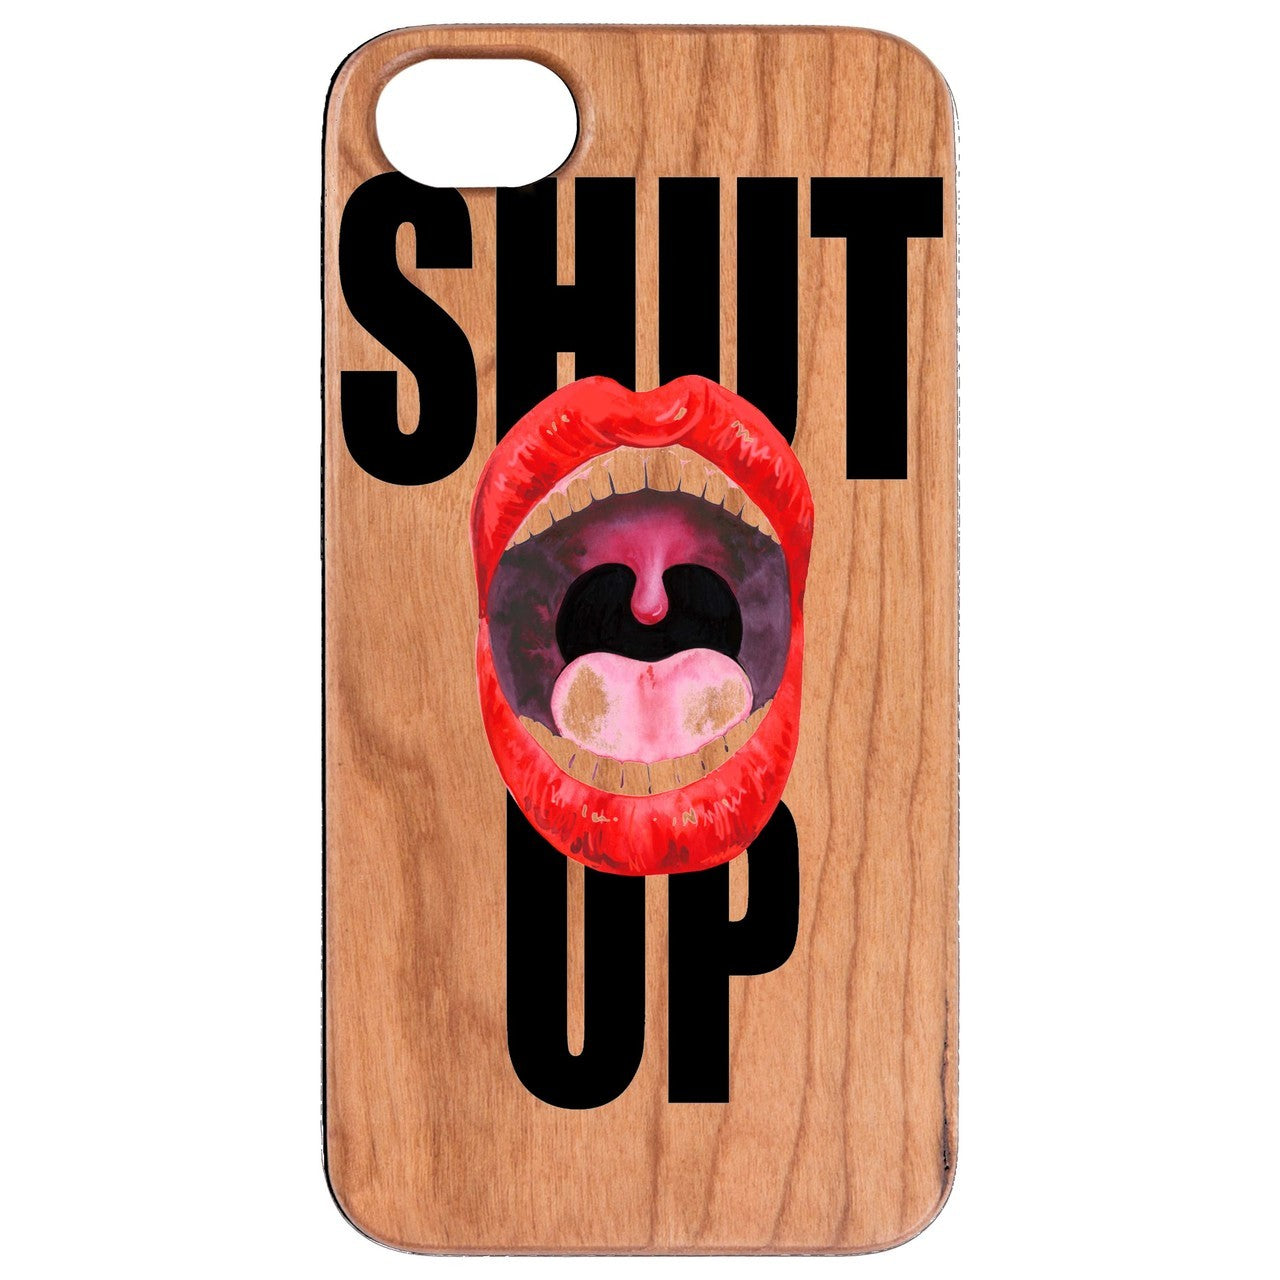  Shut up - UV Color Printed - Wooden Phone Case - IPhone 13 Models